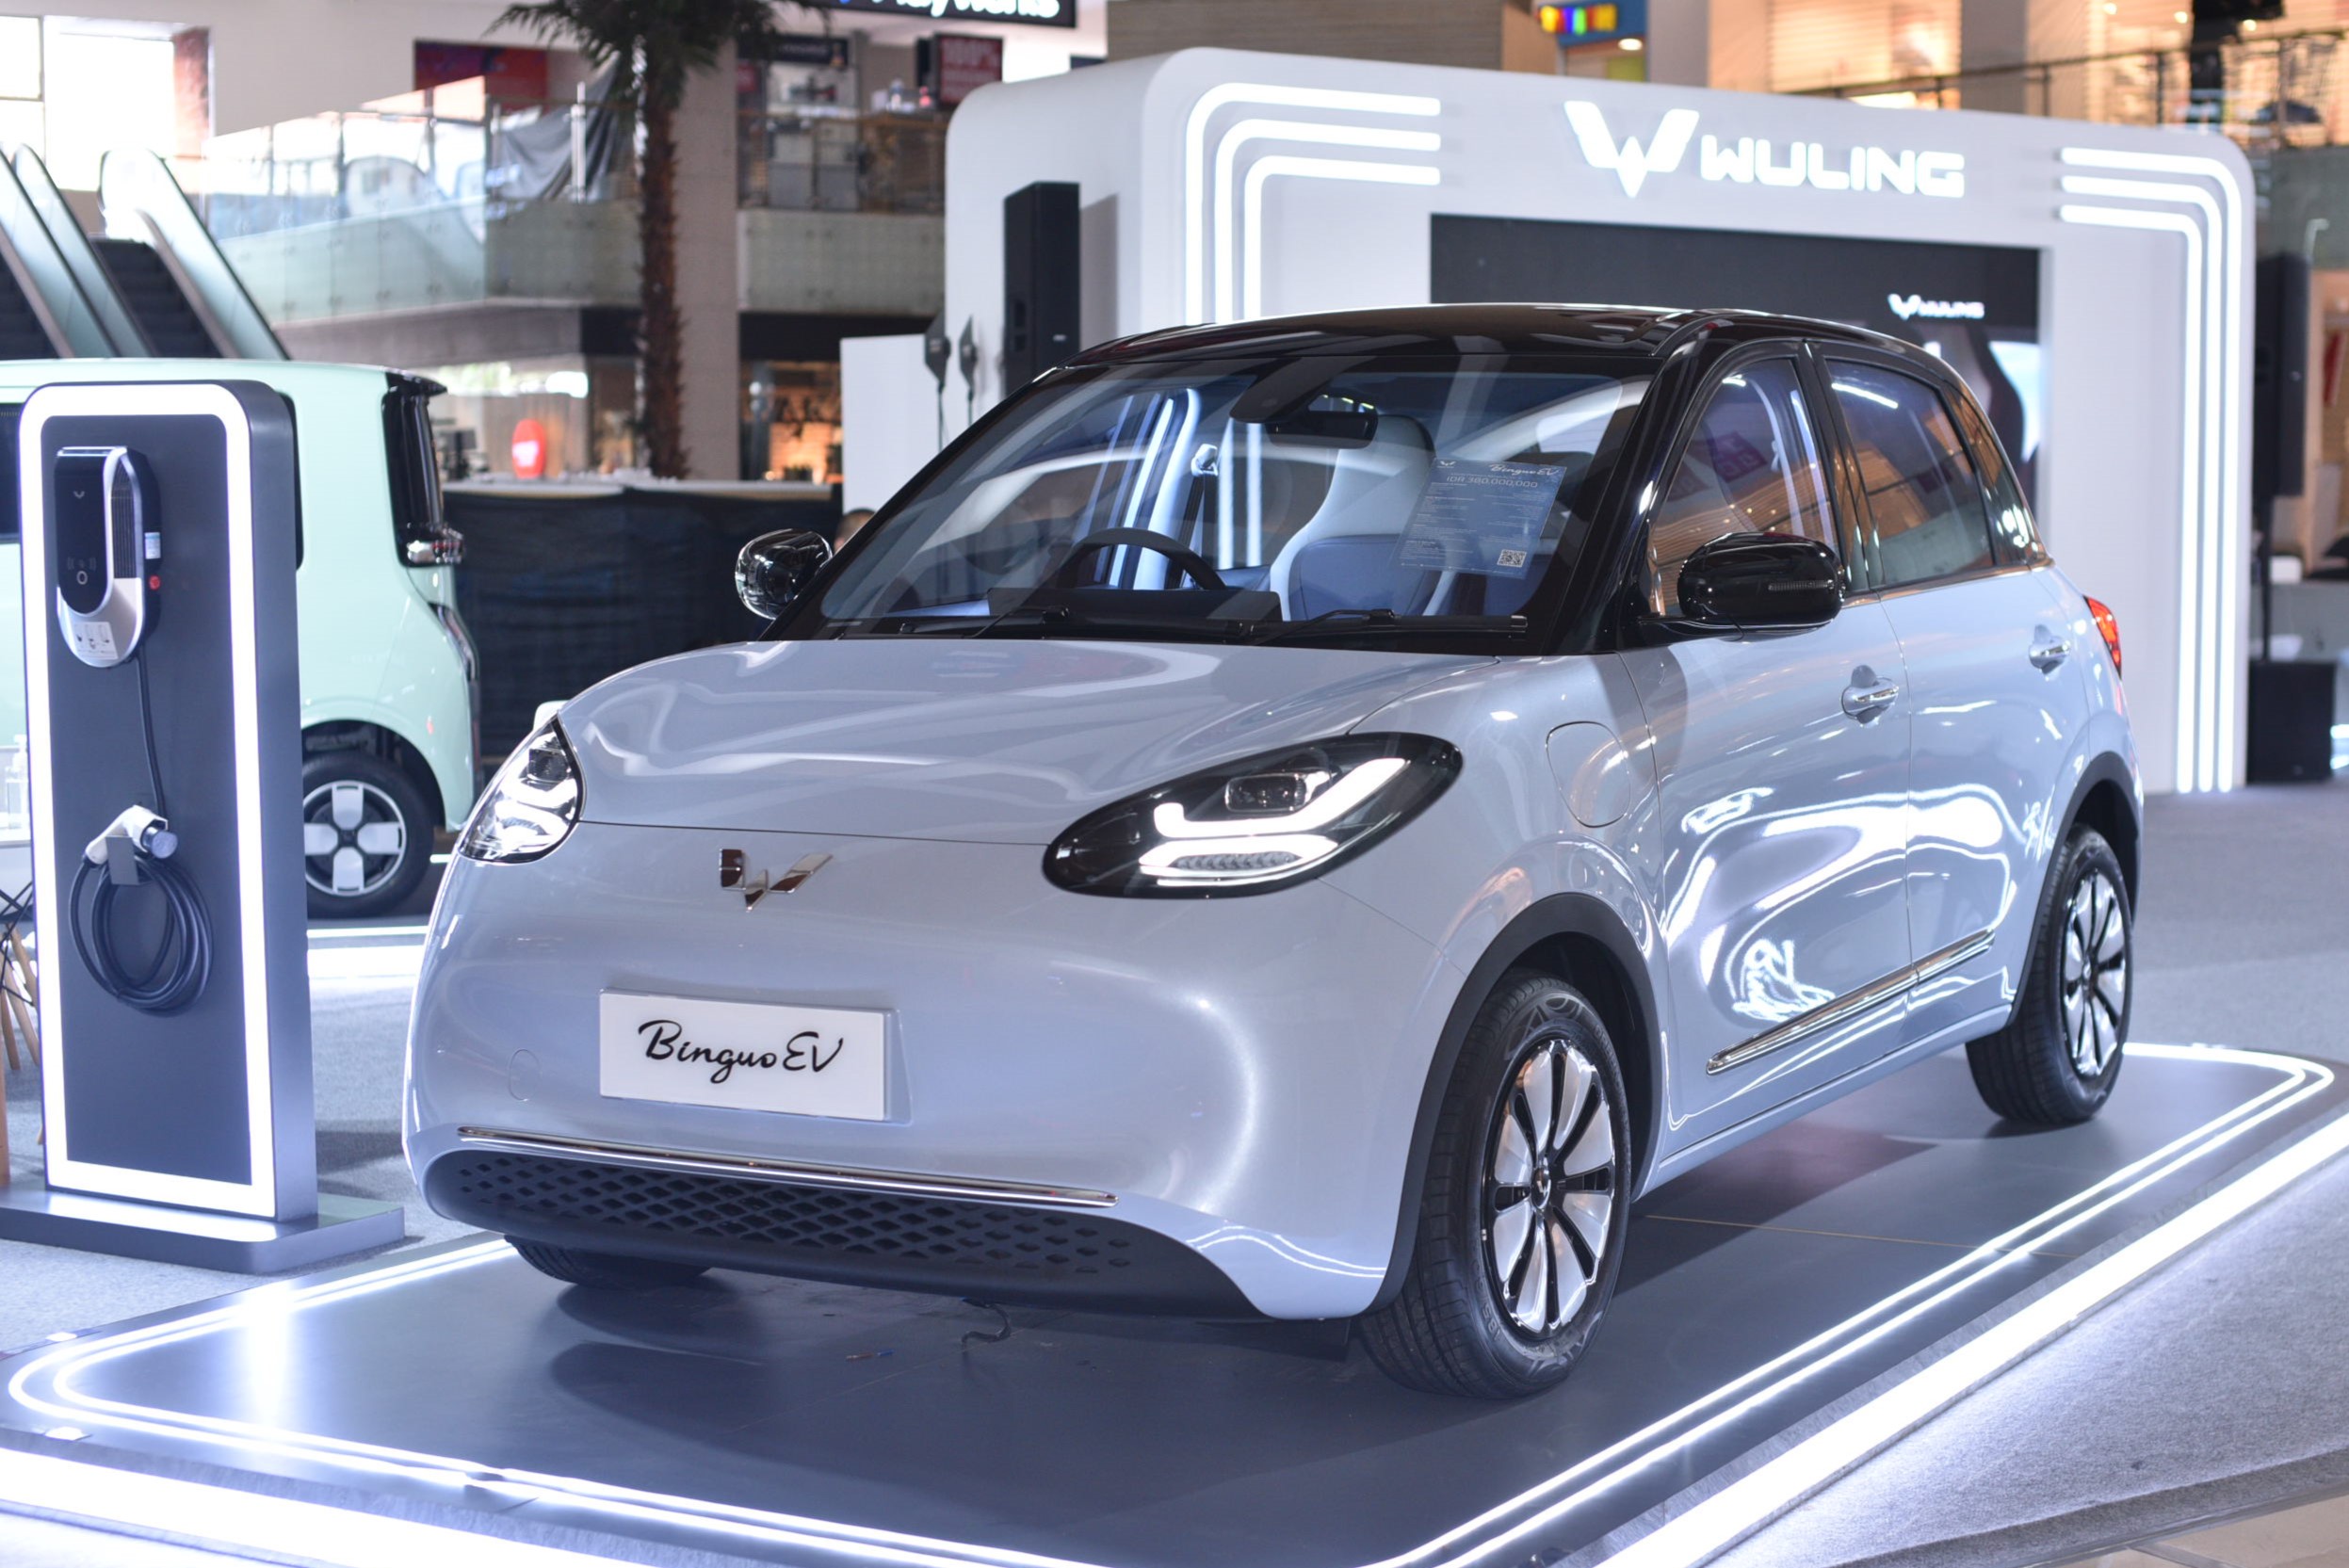 Image Wuling’s Second Electric Car, BinguoEV Starts being Marketed to Bali Island Consumers